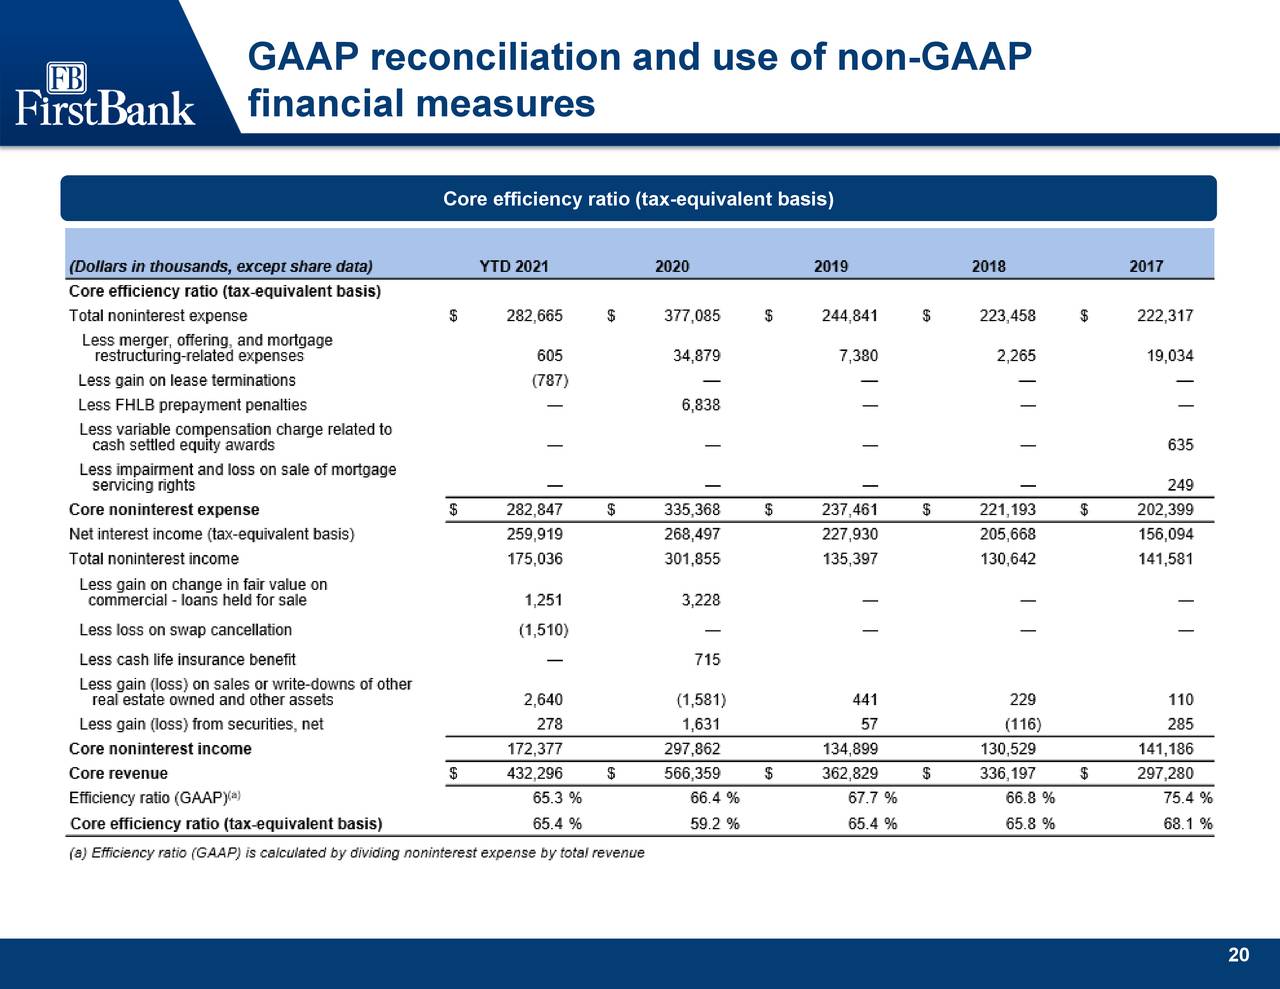 GAAP reconciliation and use of non-GAAP